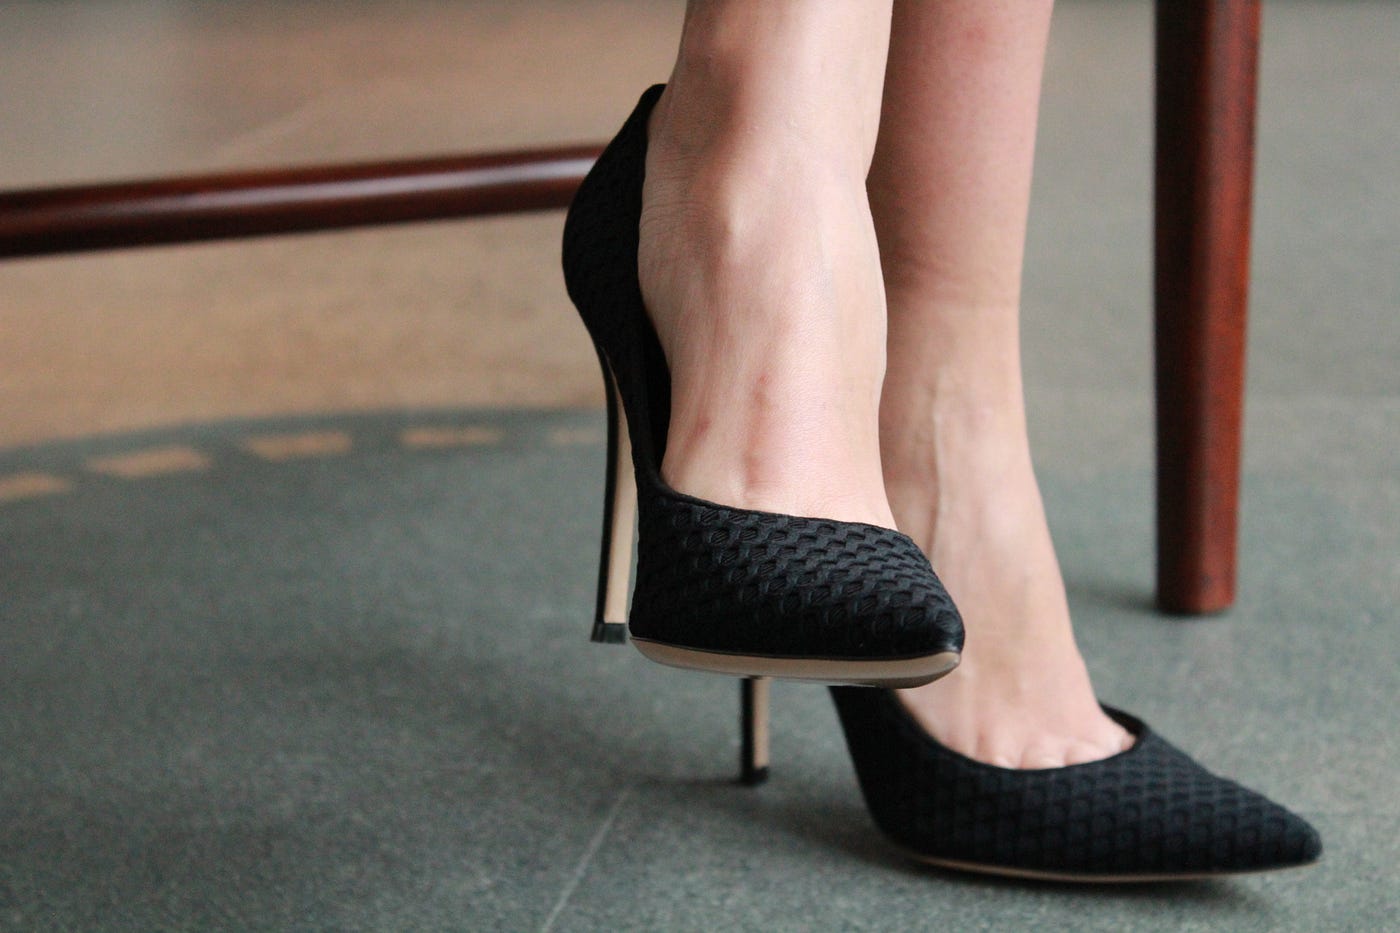 Why Are Women Obsessed With Wearing High Heels | by Hannah Ellen |  ILLUMINATION | Medium